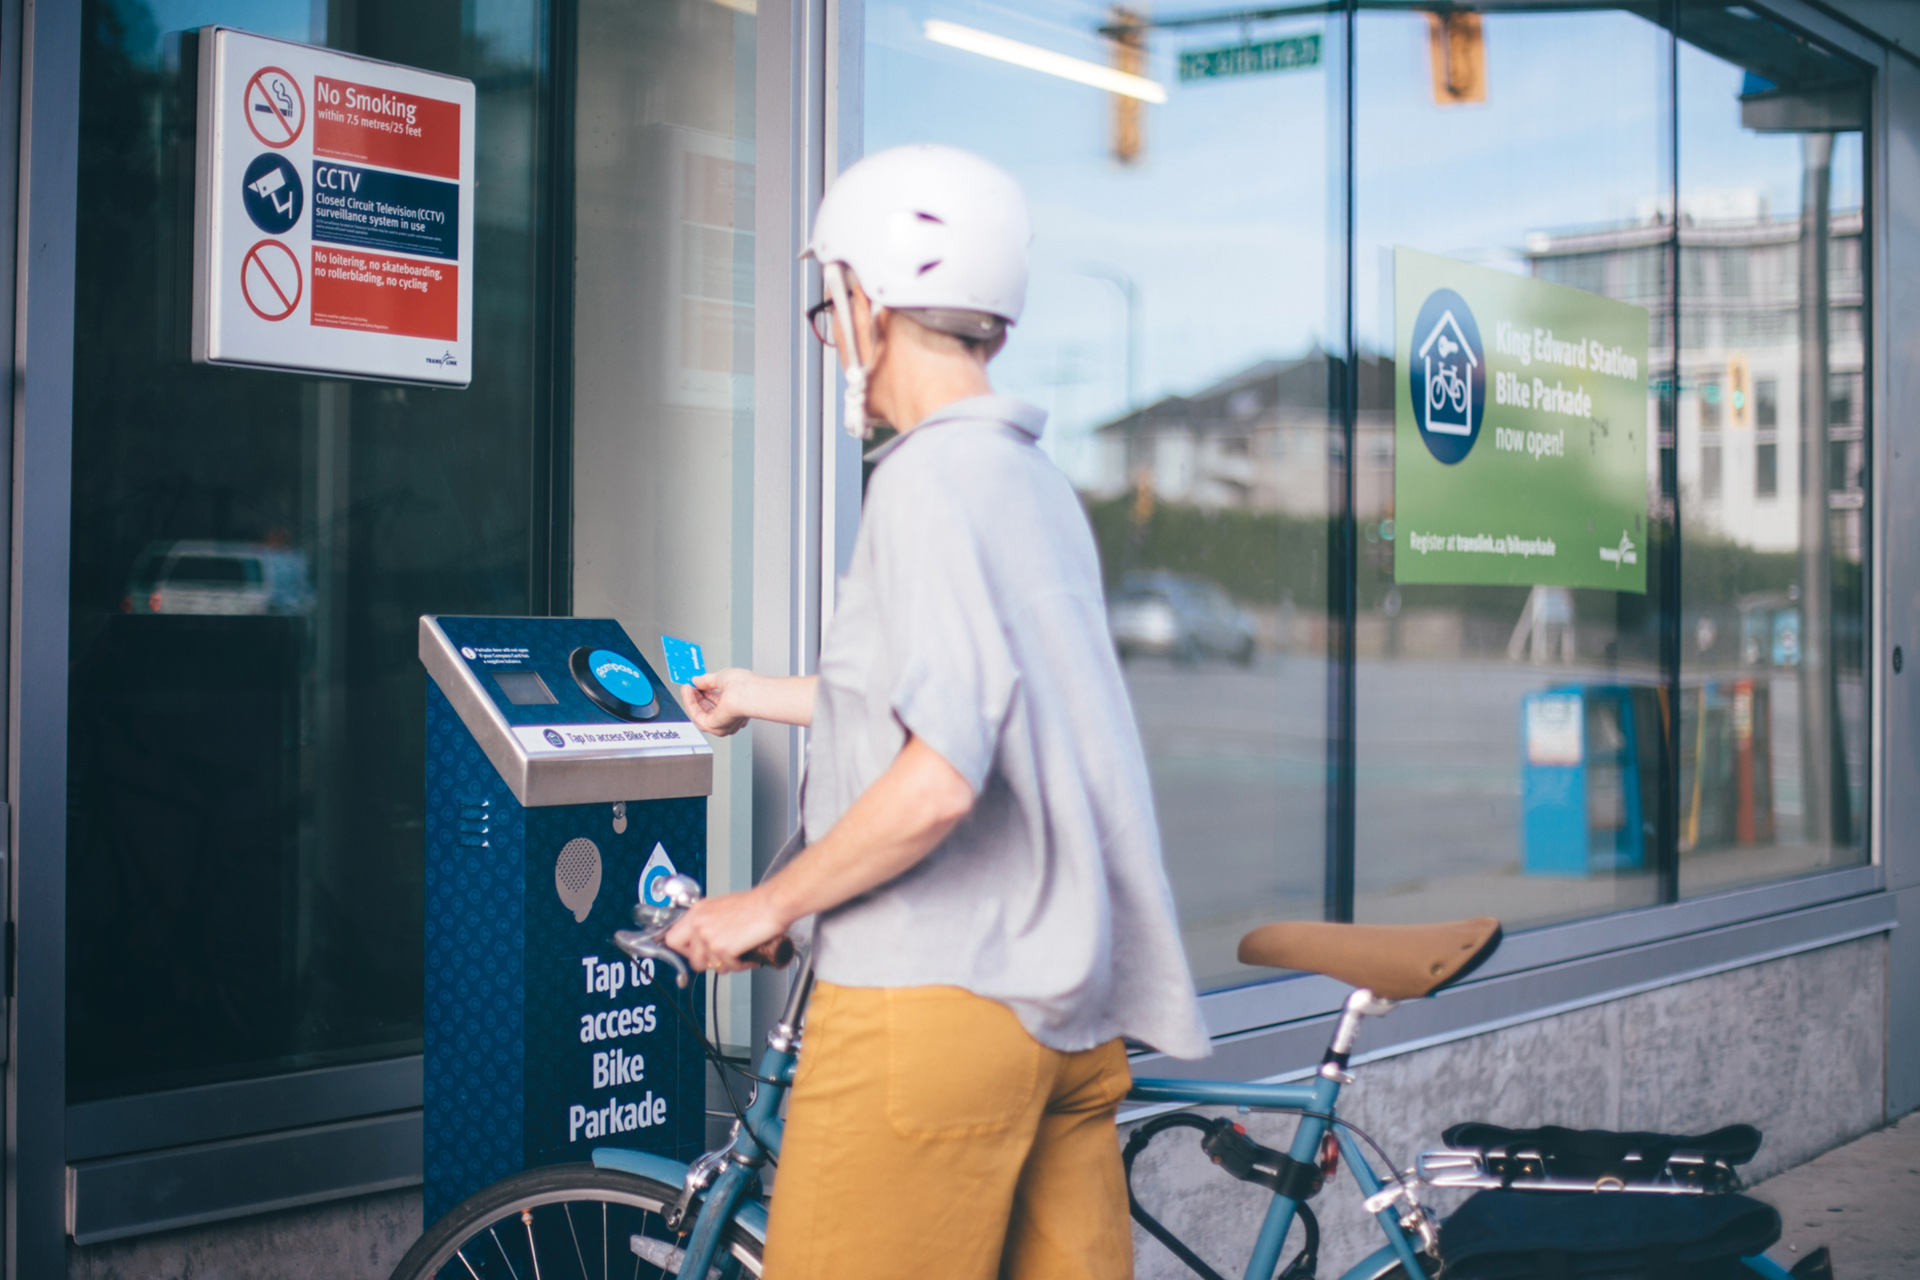 Cyclist taps Compass Card to enter the Bike Parkade